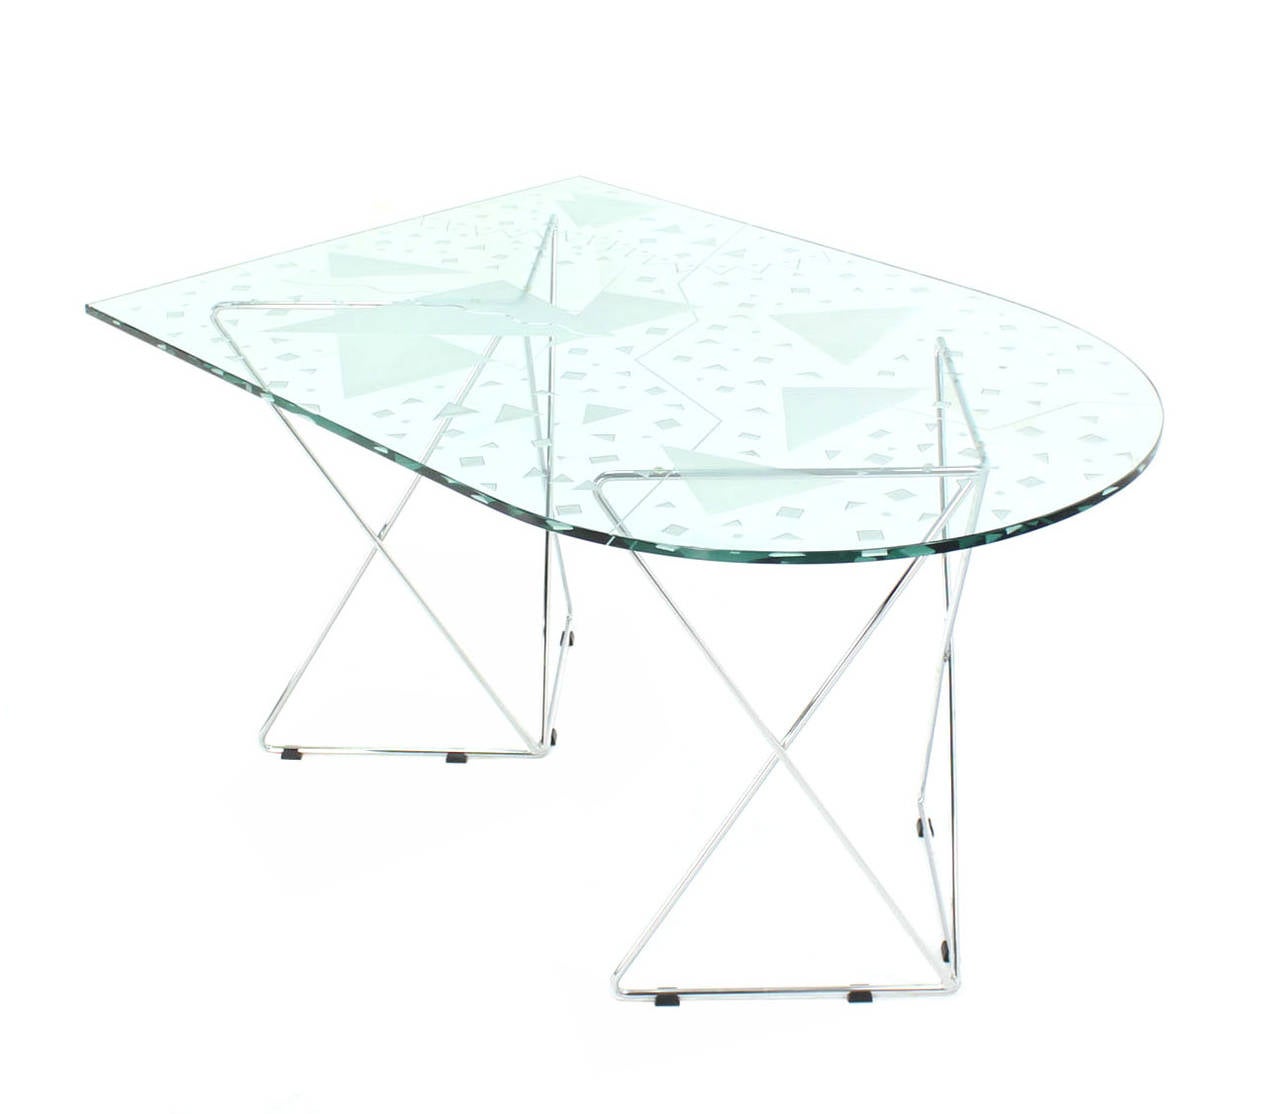 Nice mid century modern glass top dining table. Nice etched pattern glass top. Artist signed. Oval and square. 